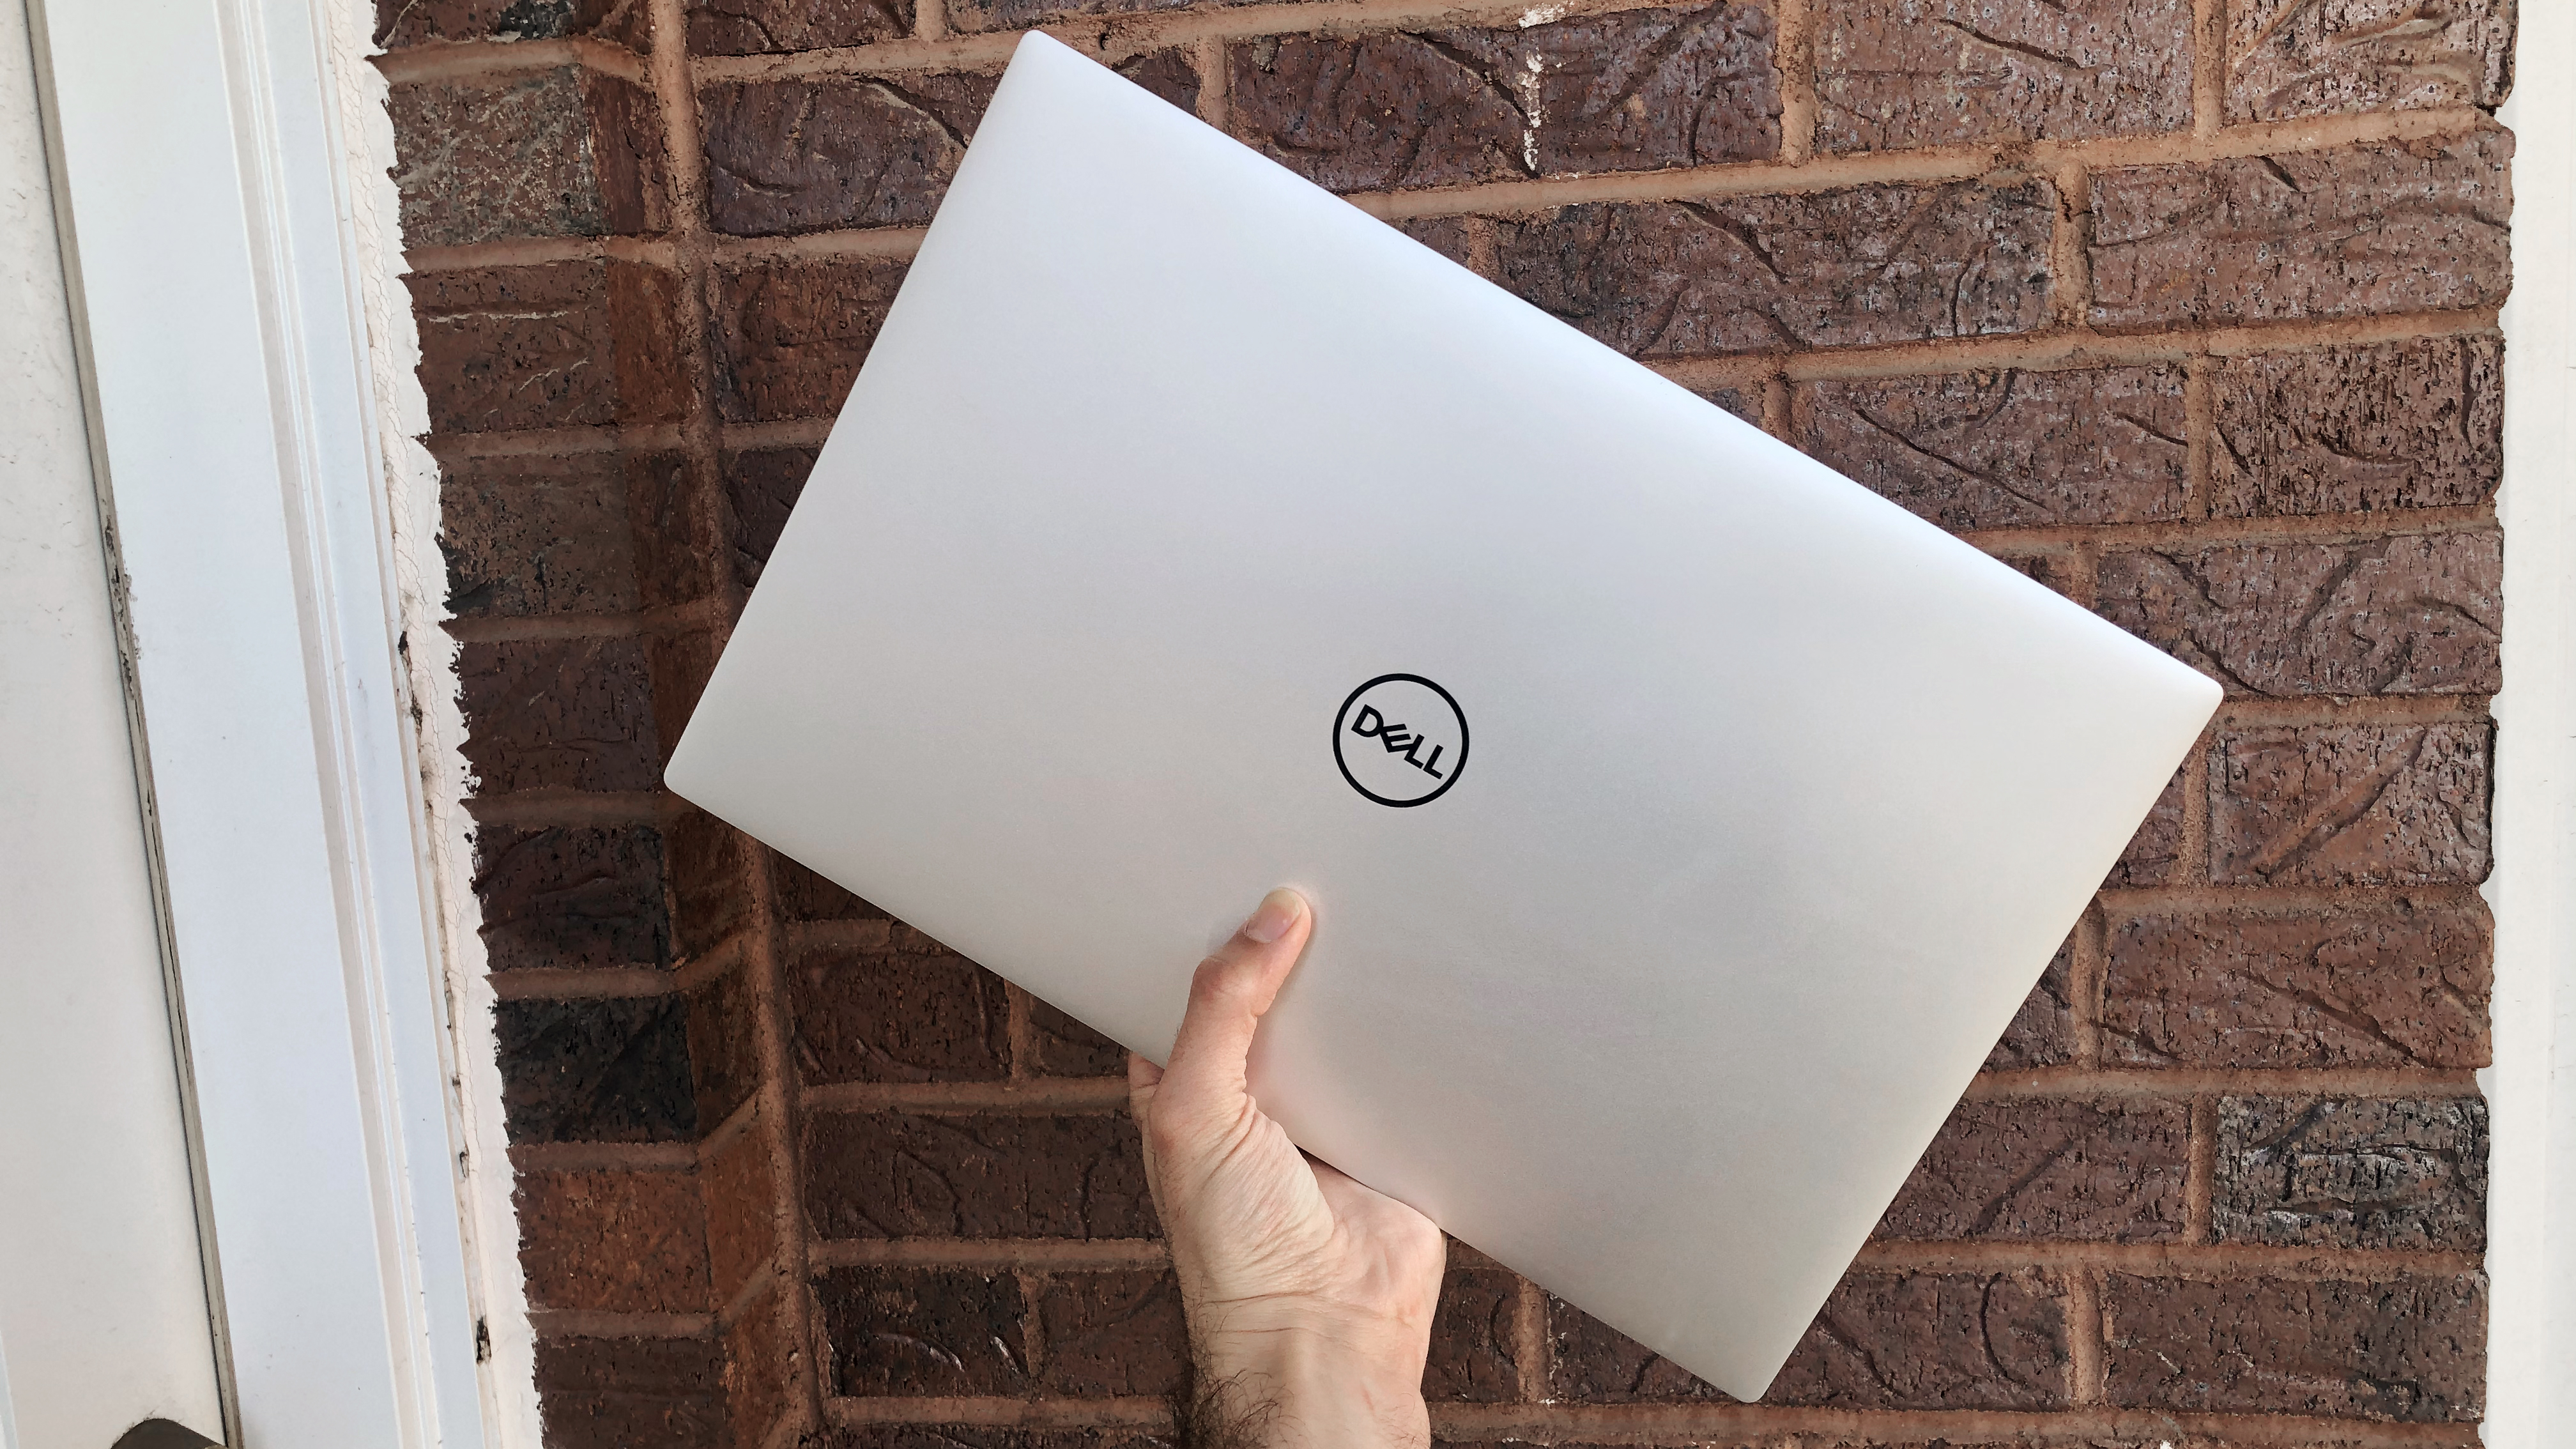 Dell XPS 15 2020 review